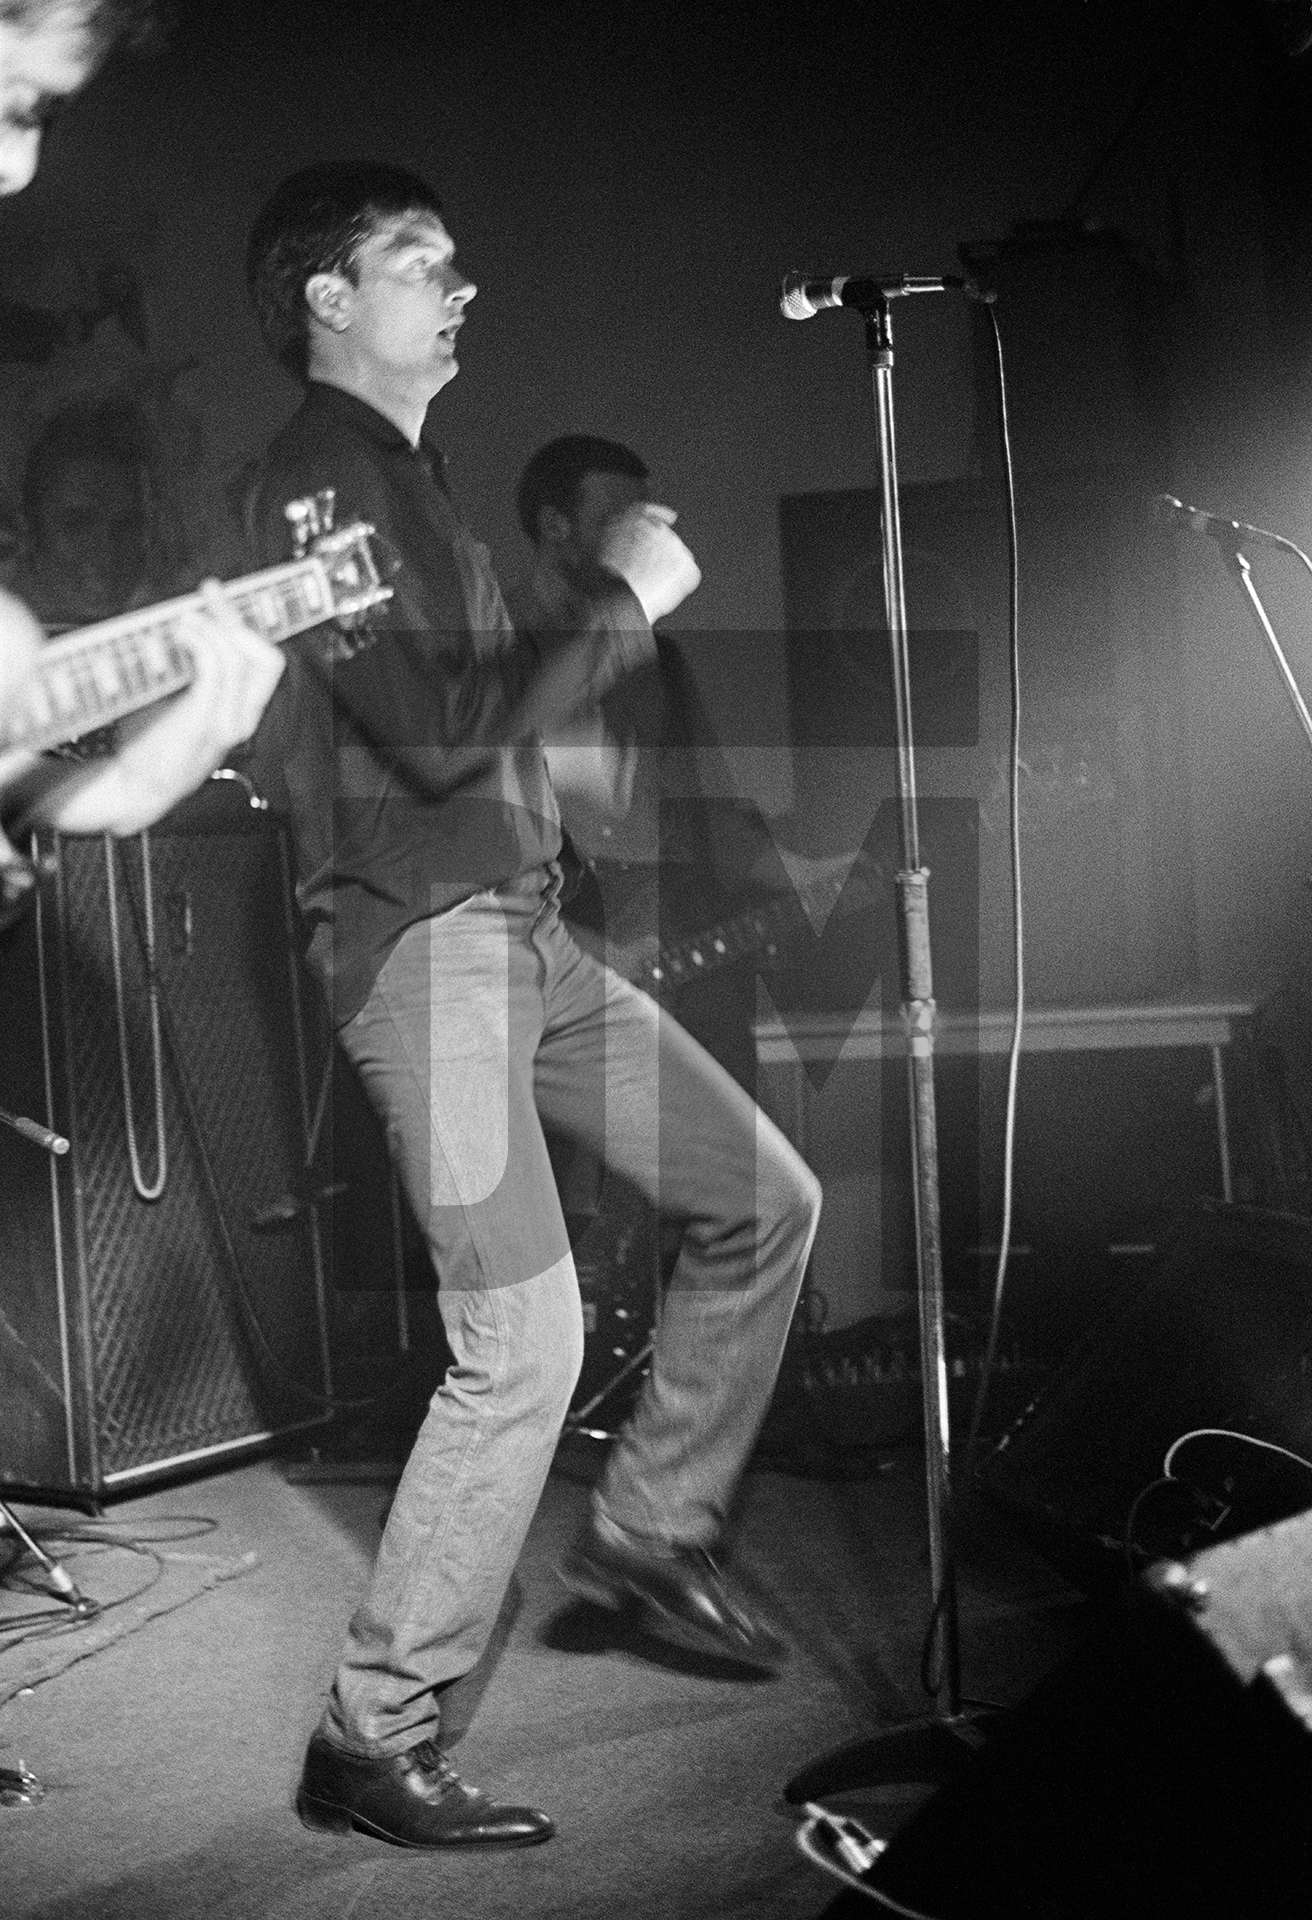 Ian Curtis of Joy Division on stage at New Osbourne Club, Miles Platting, Manchester. 7 February 1980 by Daniel Meadows